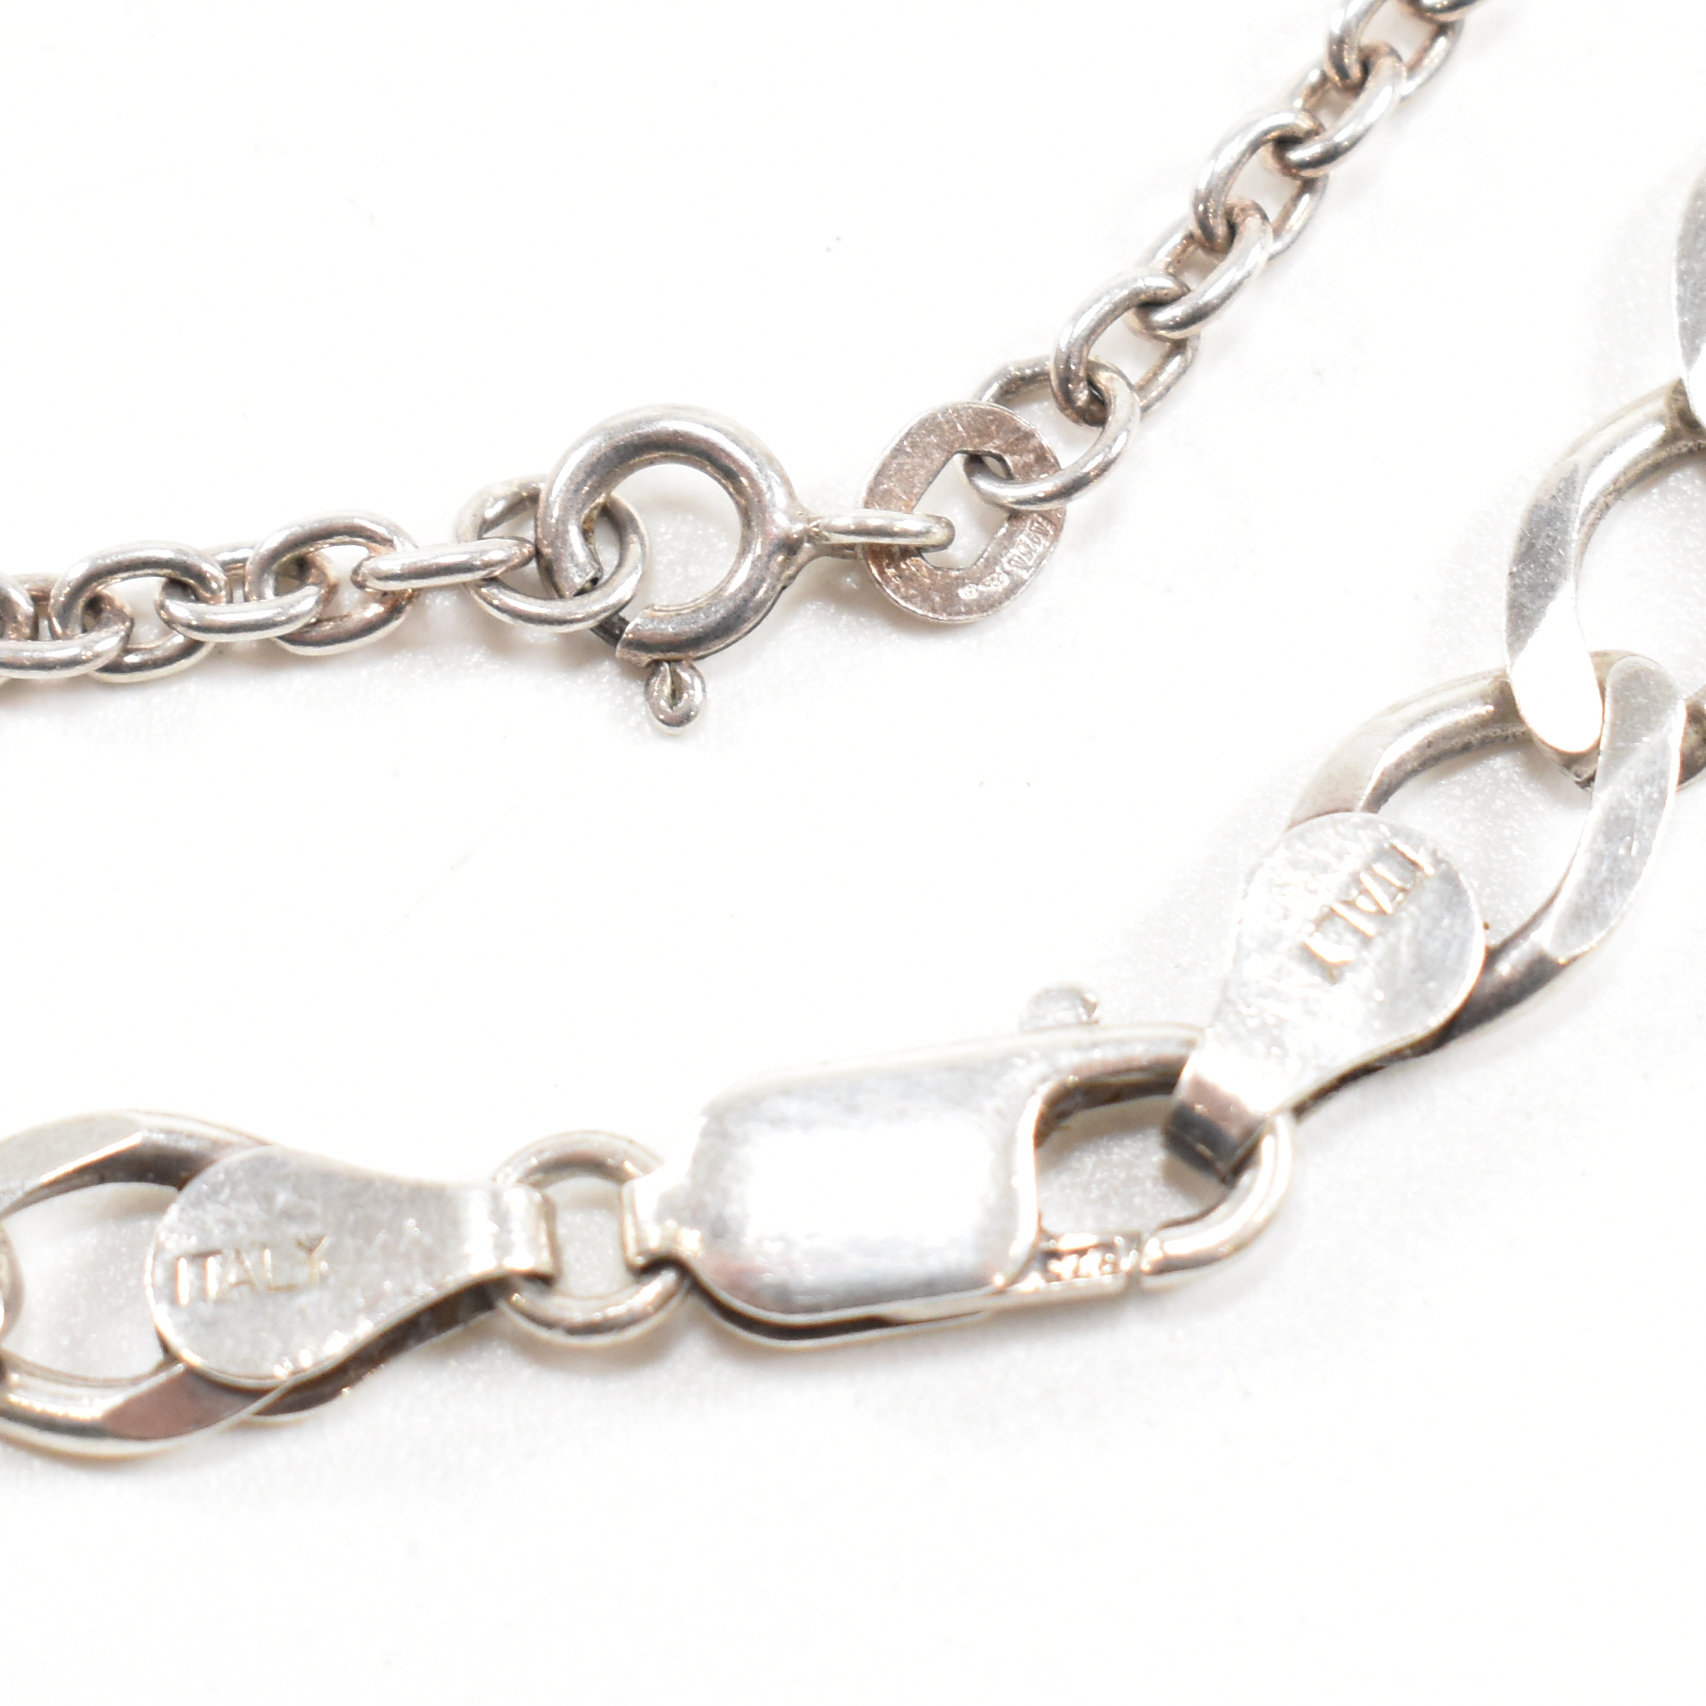 TWO HALLMARKED 925 SILVER CHAIN NECKLACES - Image 5 of 7